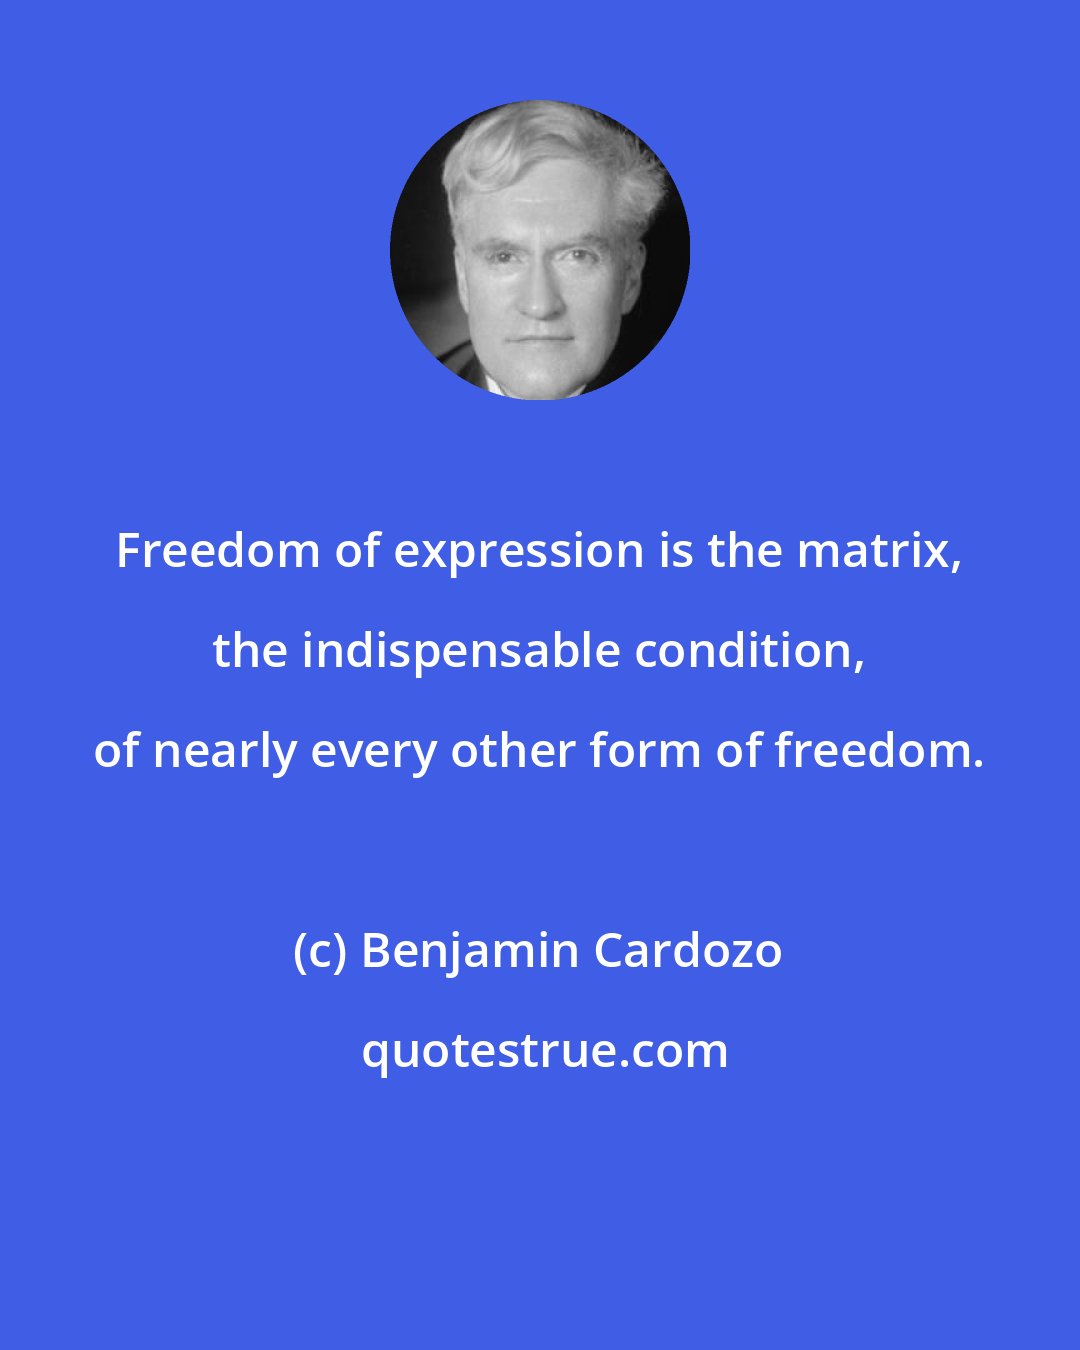 Benjamin Cardozo: Freedom of expression is the matrix, the indispensable condition, of nearly every other form of freedom.